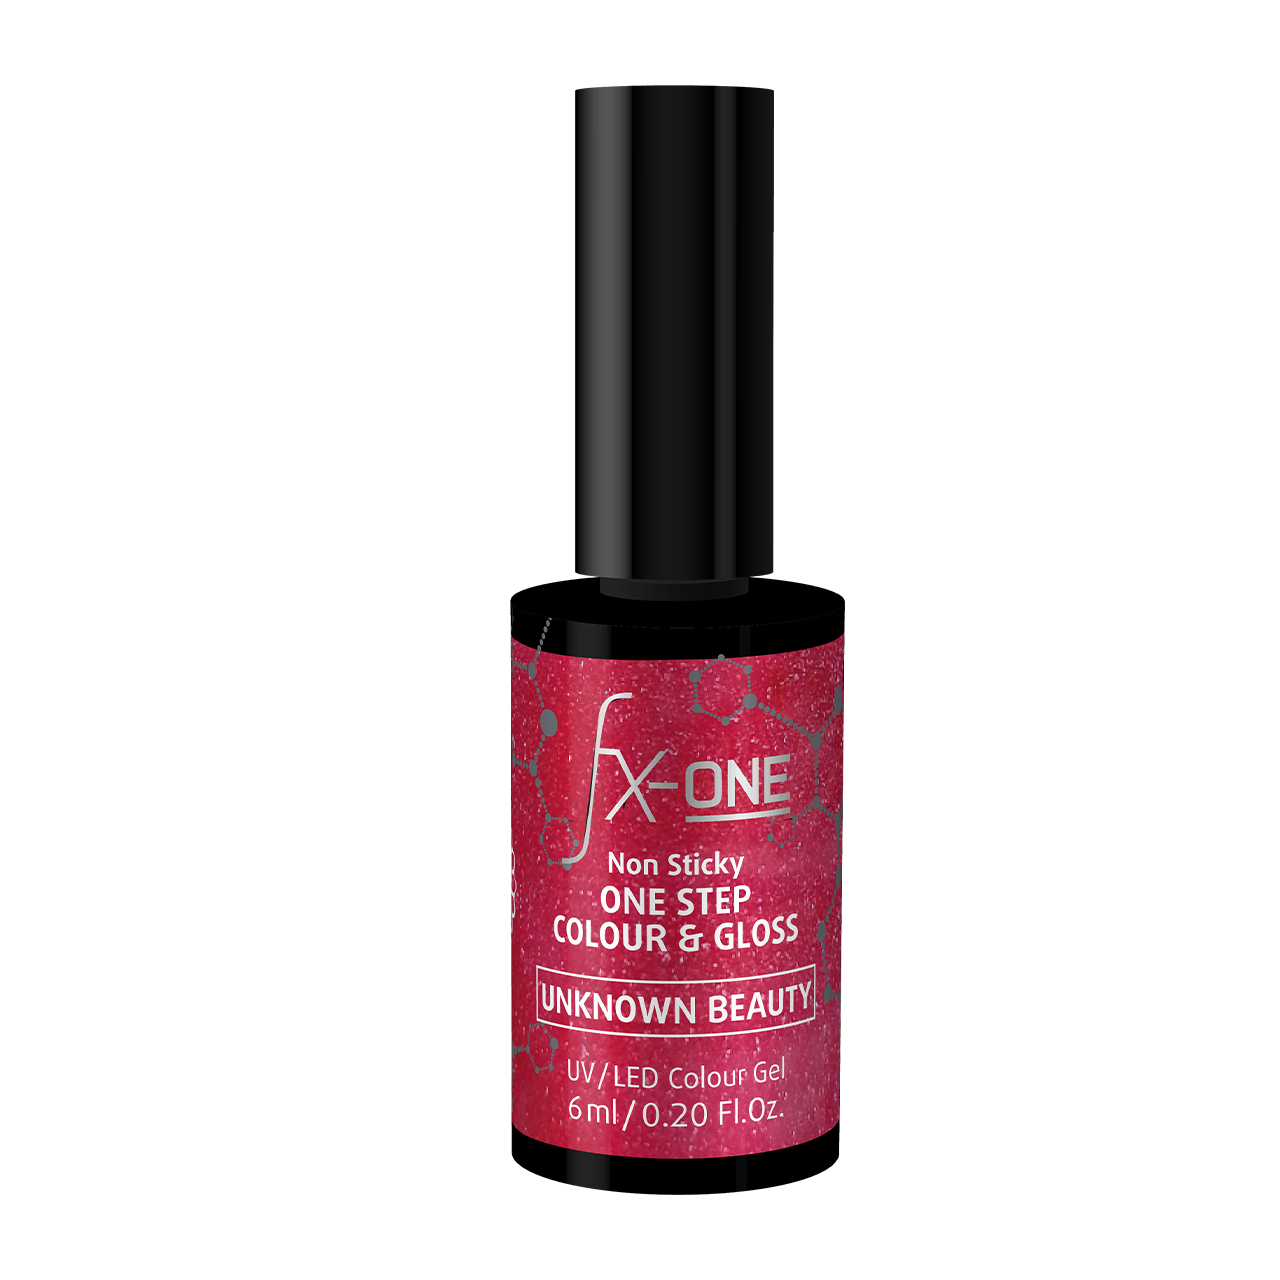 FX ONE Colour & Gloss Unknown Beauty!